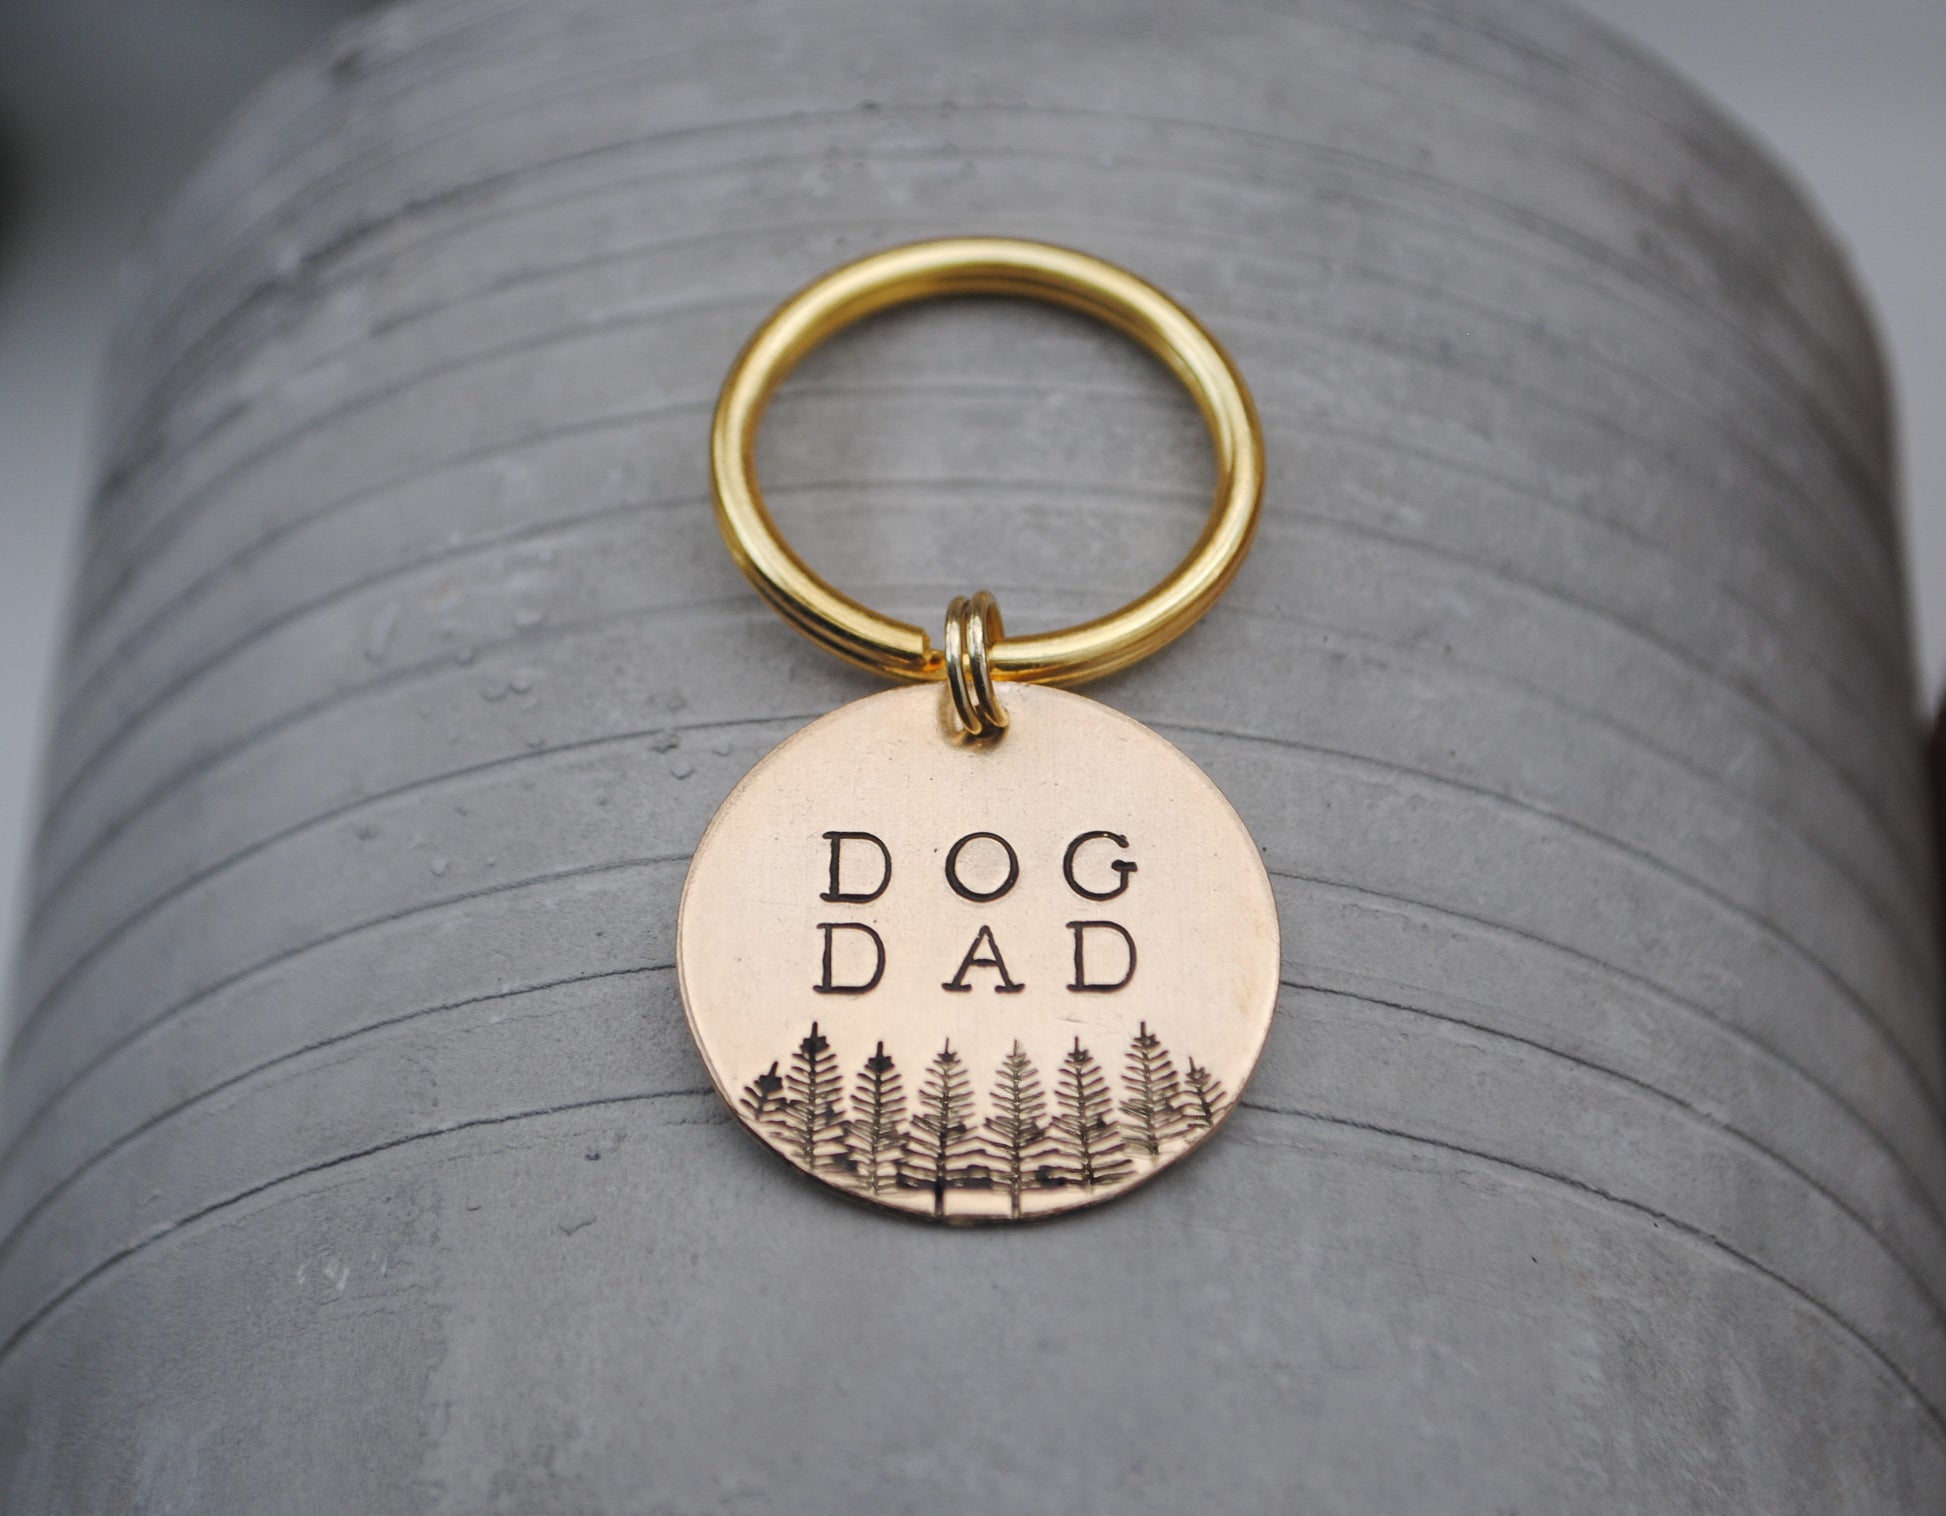 Dog Dad Keychain - Dog Dad Gift - Gift for Him - Pet Parents Gift - Fur Dad - Dog Dad Keytag - Gift for Couples - Cat Dad Gift - Unique Gift